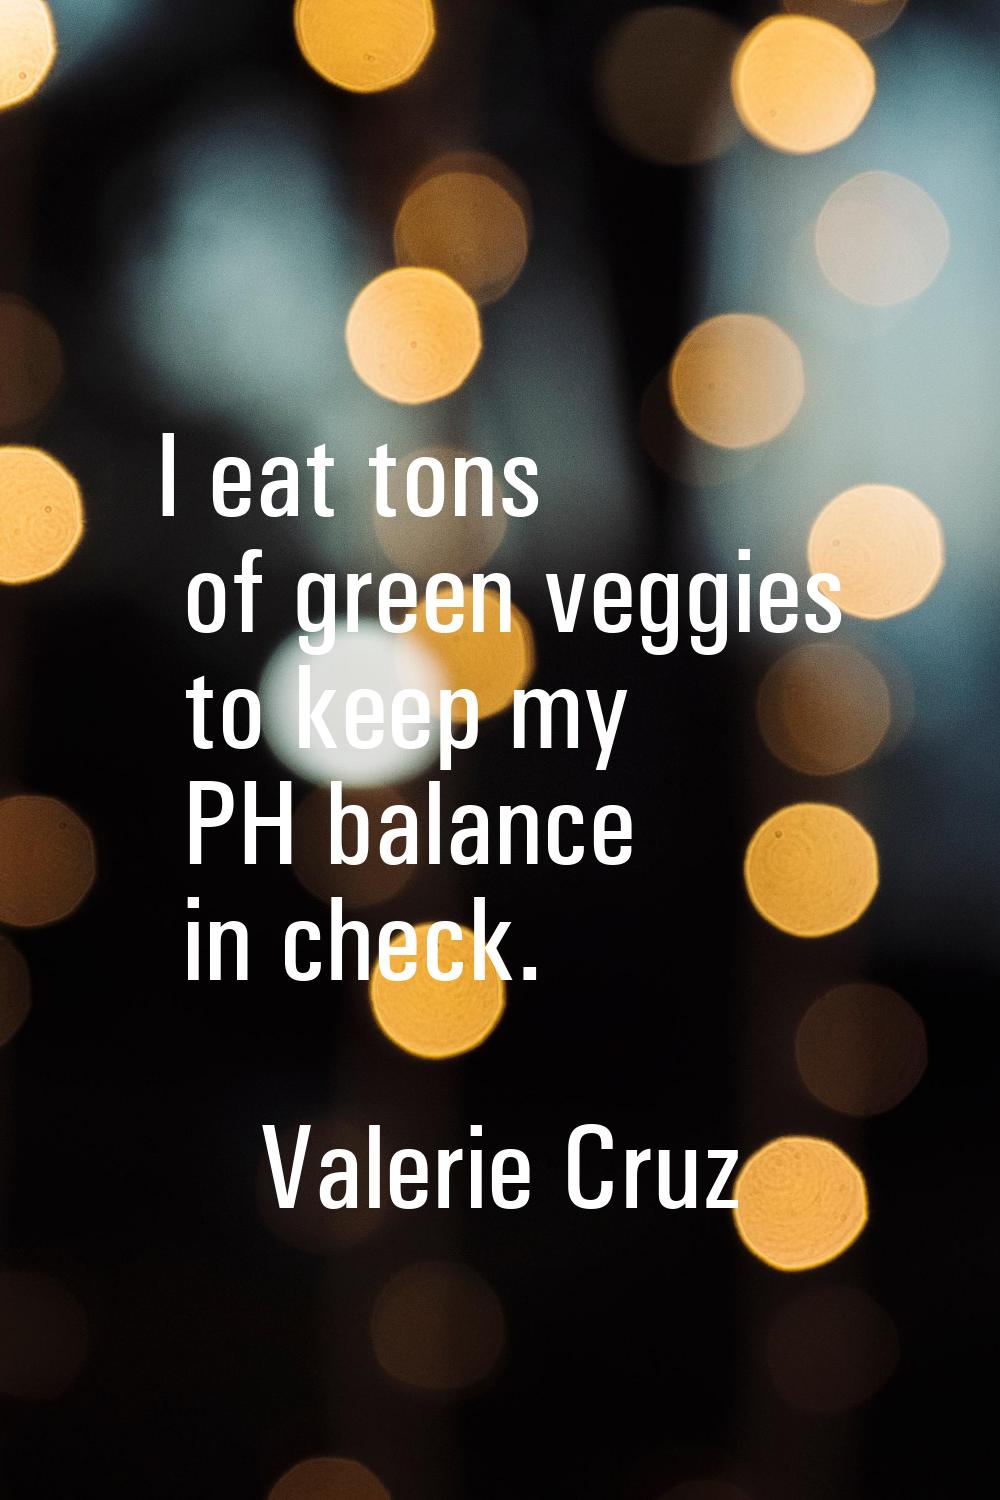 I eat tons of green veggies to keep my PH balance in check.